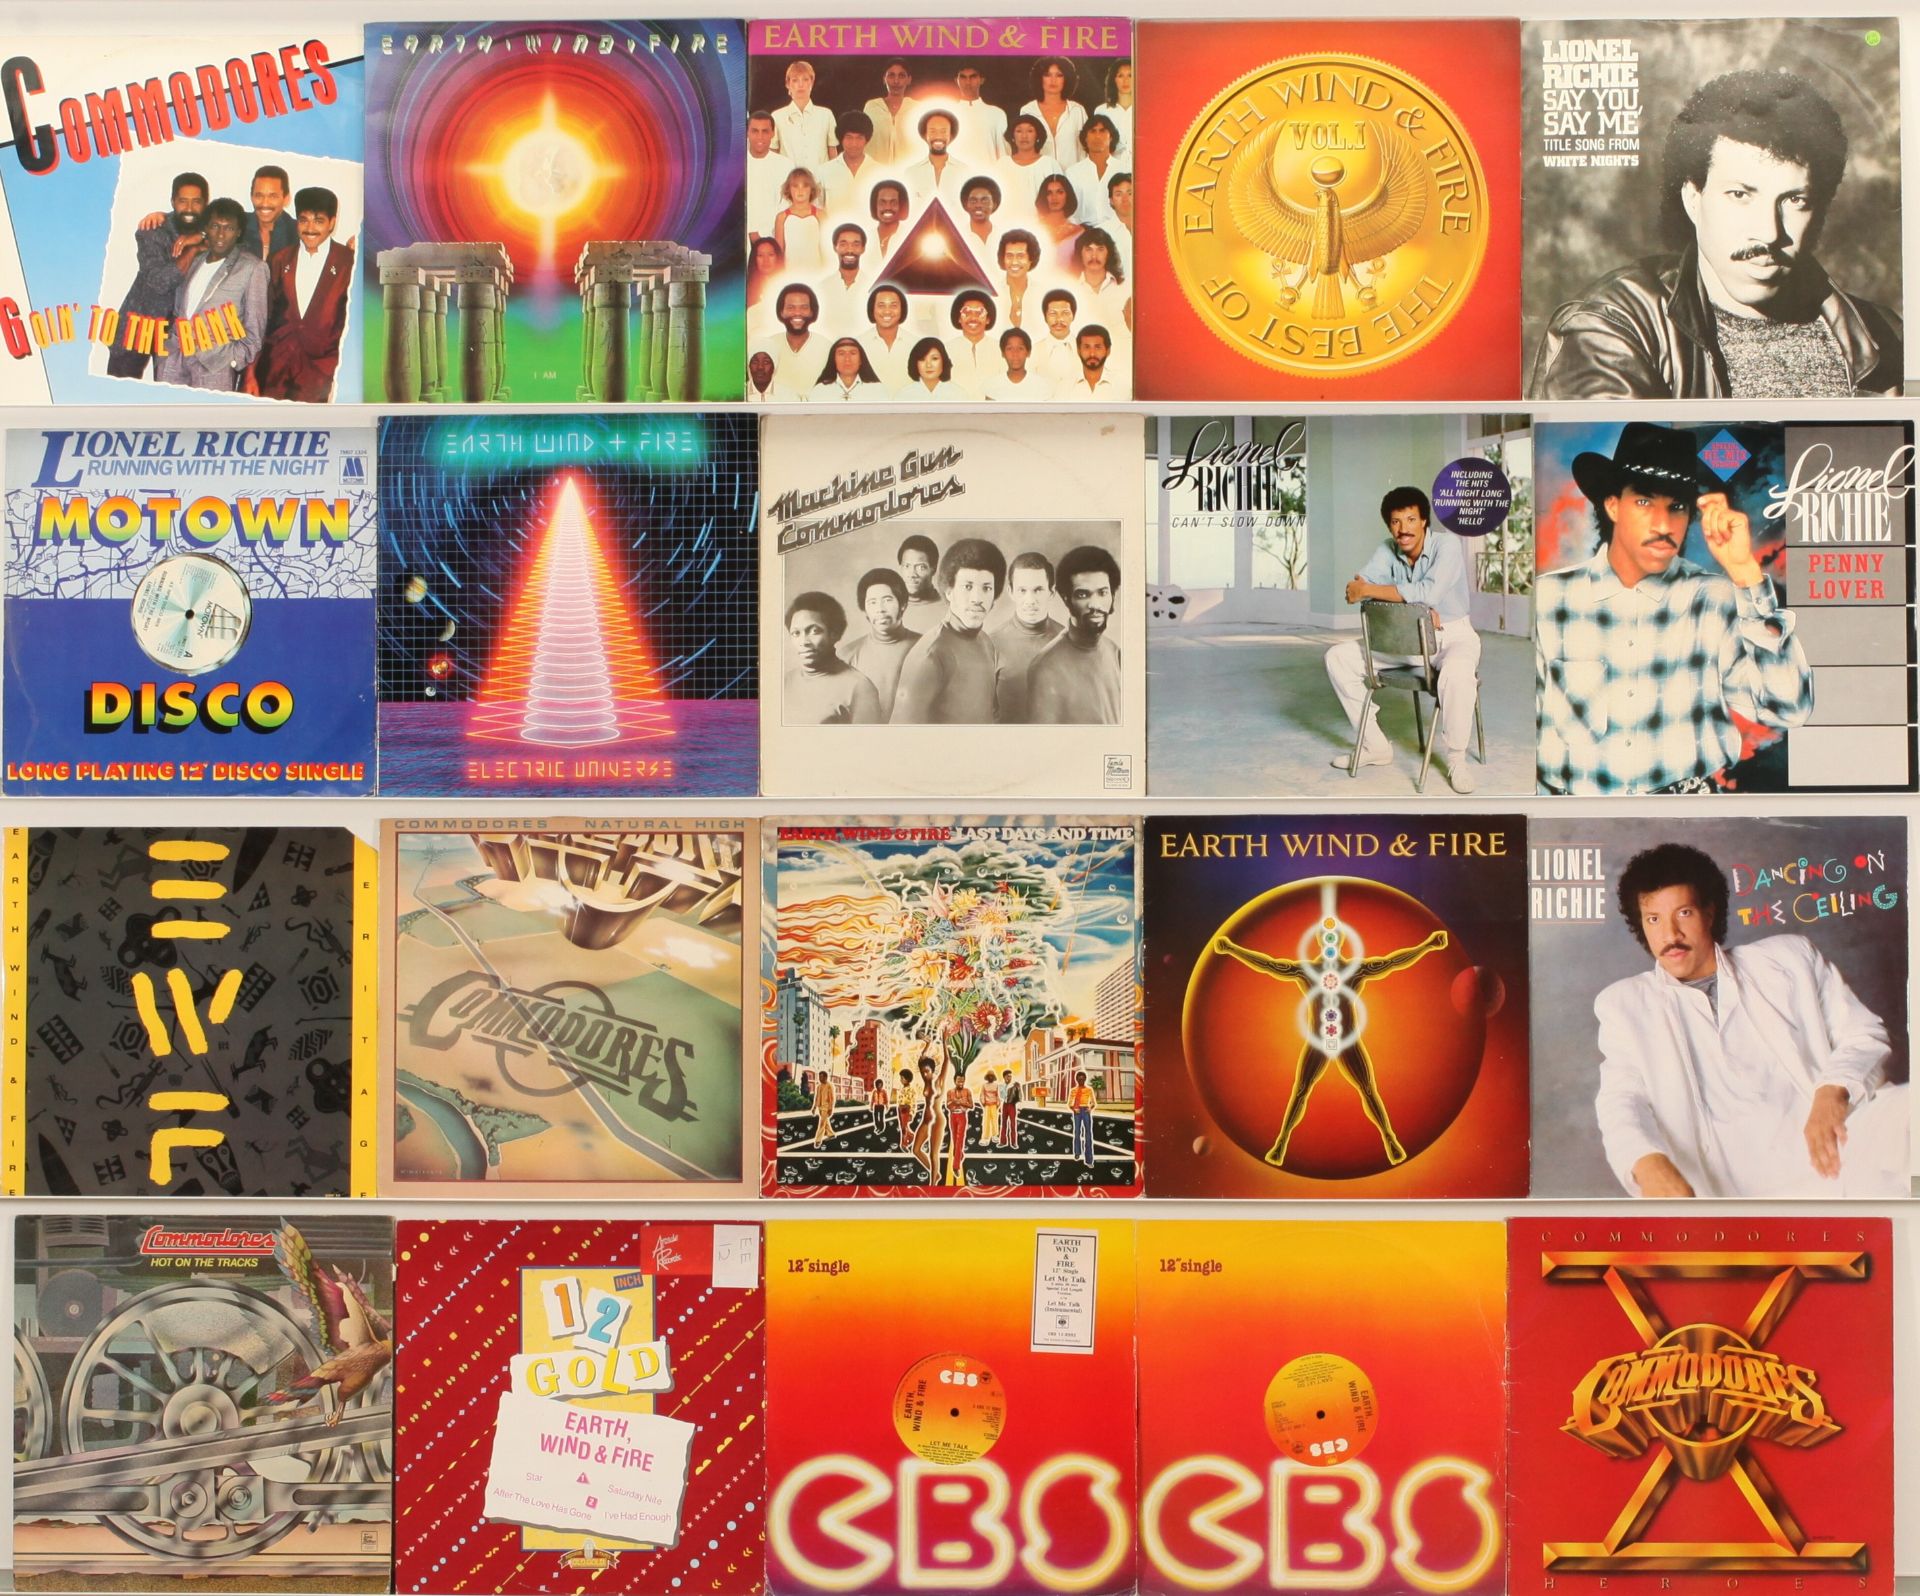 Earth Wind & Fire/Commoders and Related LPs